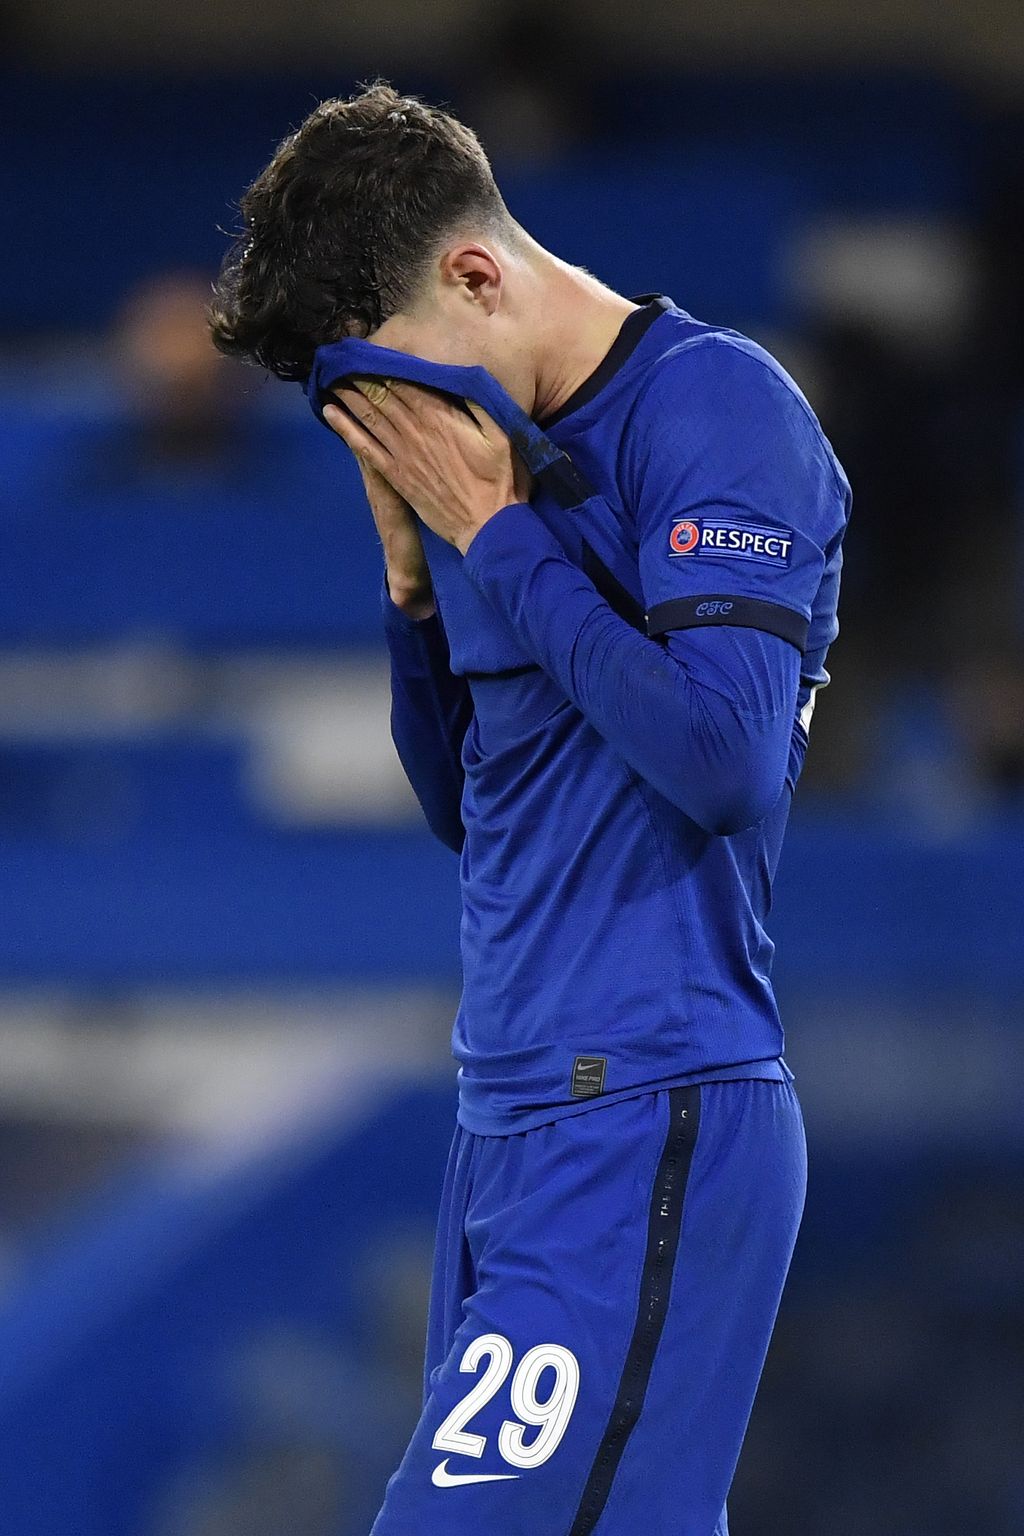 LONDON, ENGLAND - OCTOBER 20: Kai Havertz of Chelsea reacts during the UEFA Champions League Group E stage match between Chelsea FC and FC Sevilla at Stamford Bridge on October 20, 2020 in London, England. Sporting stadiums around the UK remain under strict restrictions due to the Coronavirus Pandemic as Government social distancing laws prohibit fans inside venues resulting in games being played behind closed doors. (Photo by Toby Melville - Pool/Getty Images)